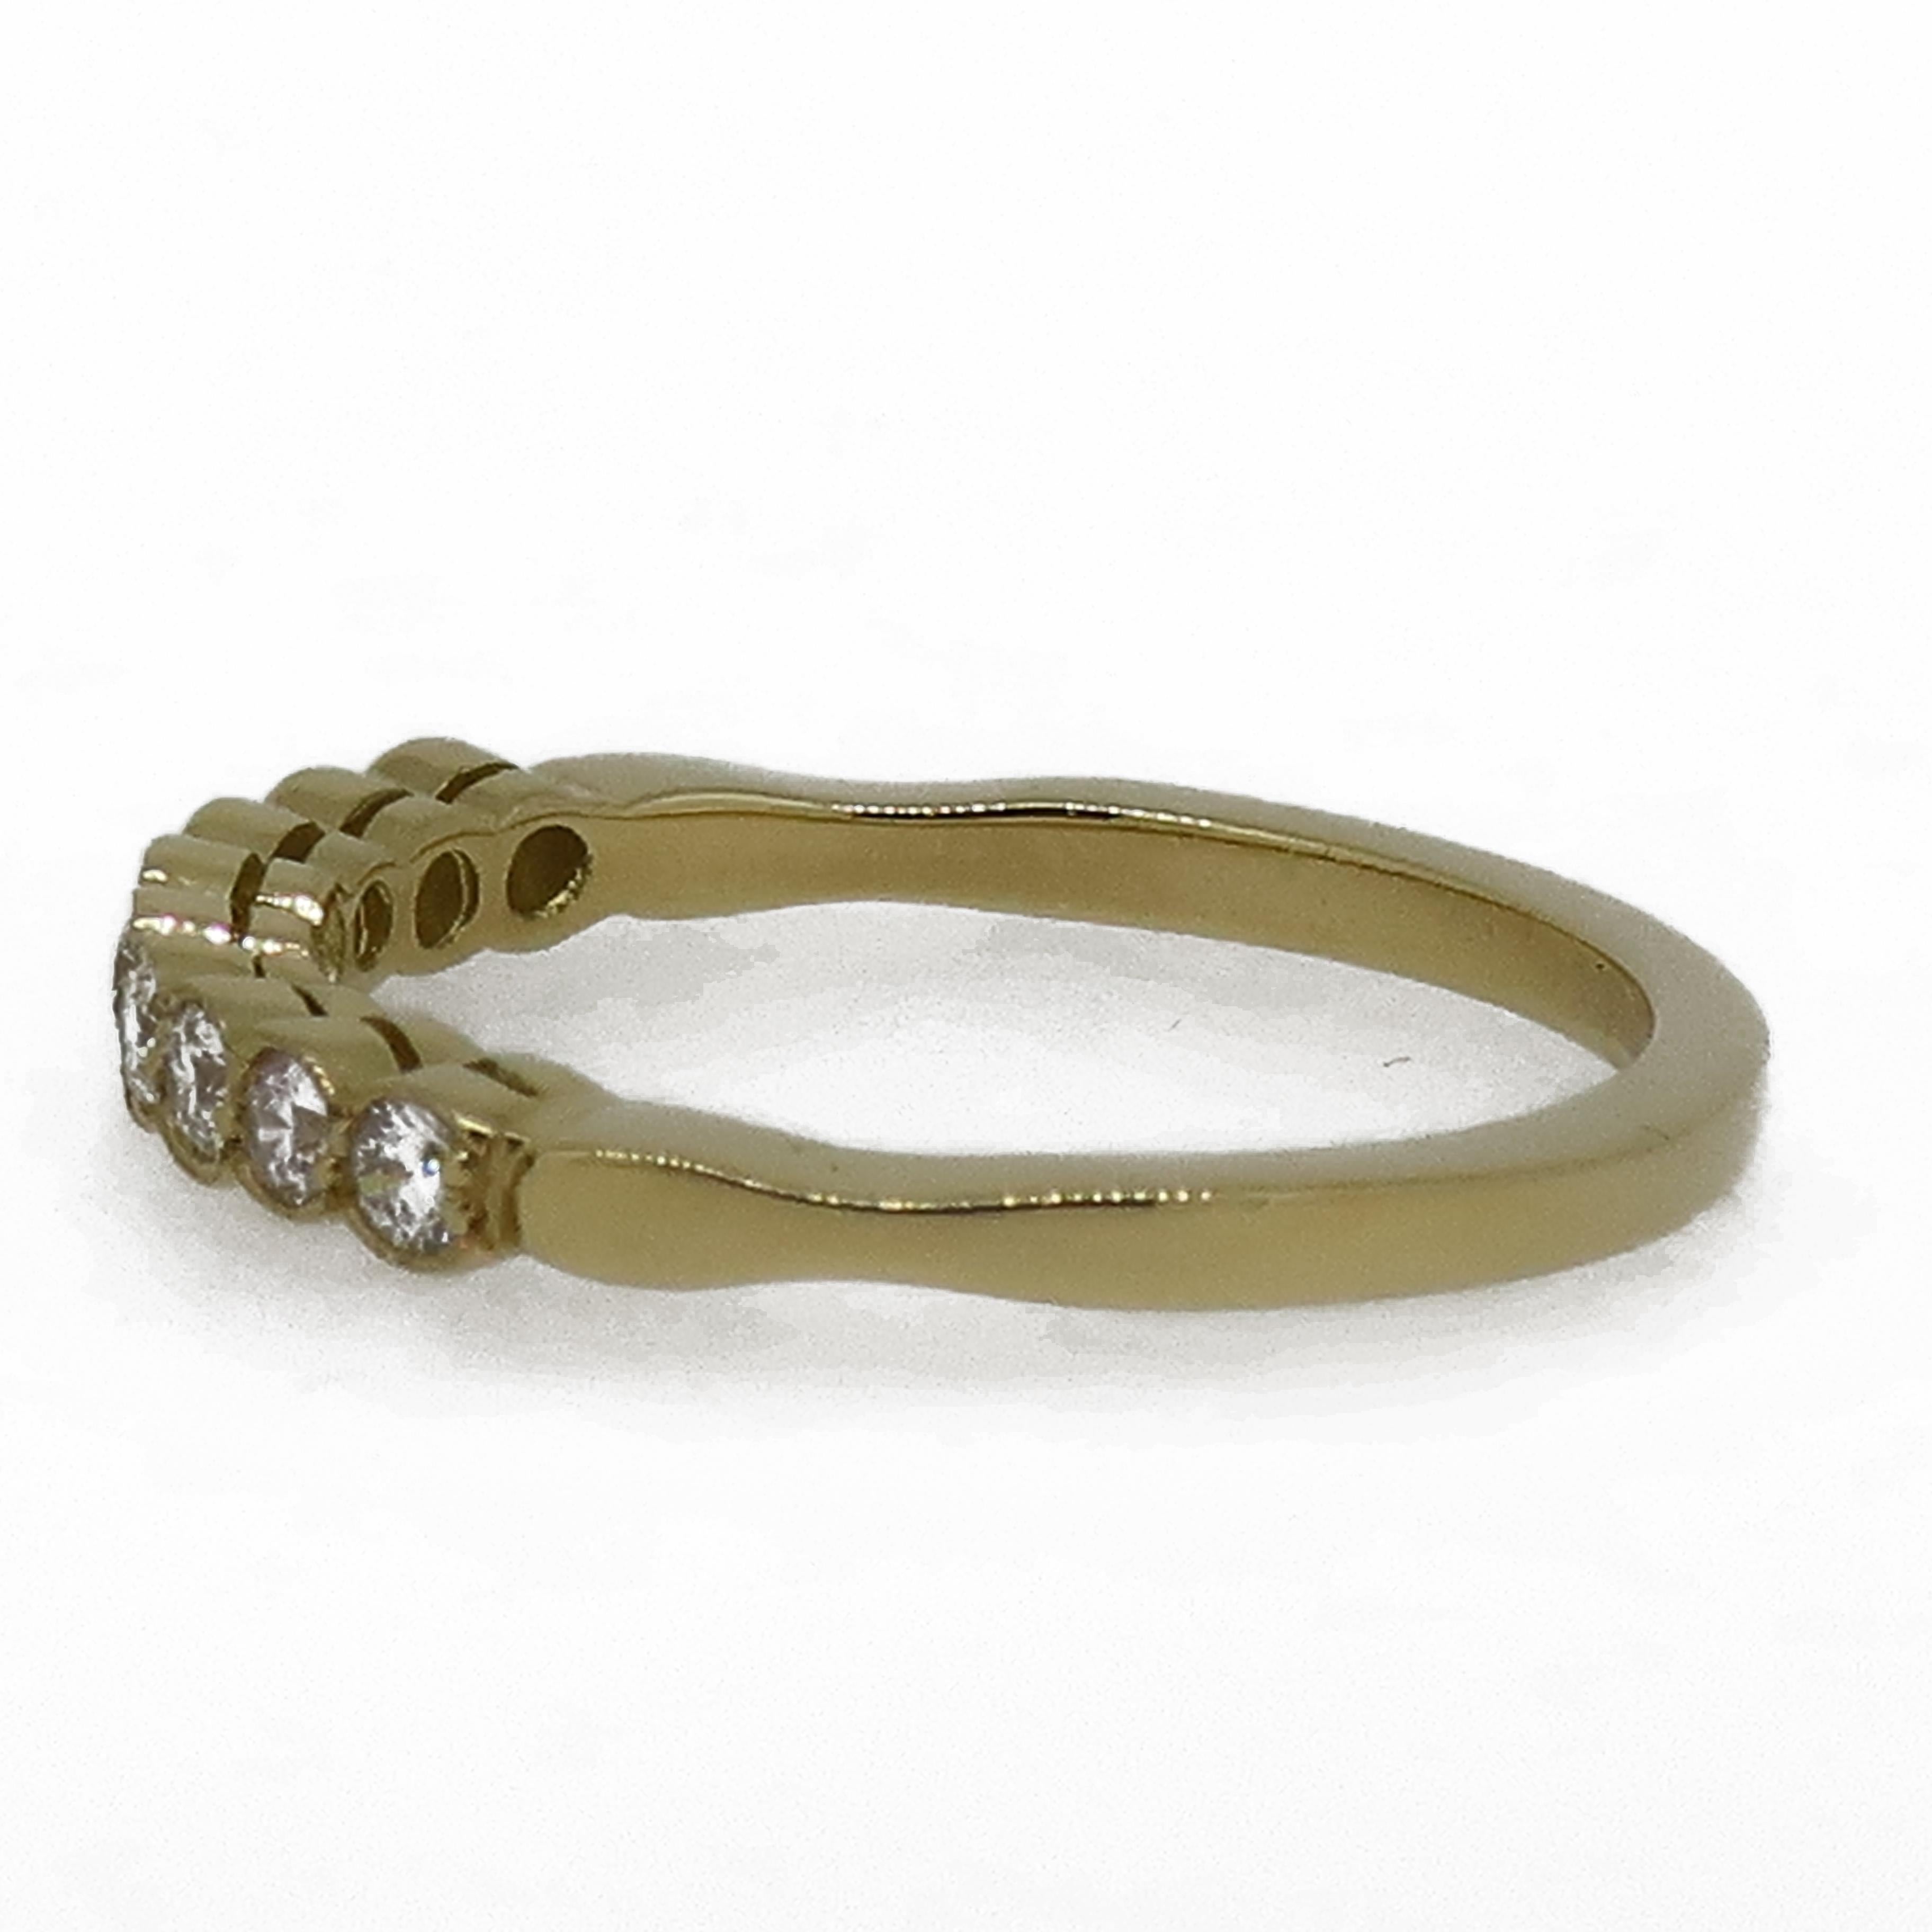 Diamond Eternity Band Ring 18 Karat Yellow Gold

A dainty diamond eternity ring. Consisting of nine white brilliant cut diamonds, weighing 0.30ct in total. All set in a delicate mill-grain setting in 18 carat yellow gold. It would make the perfect